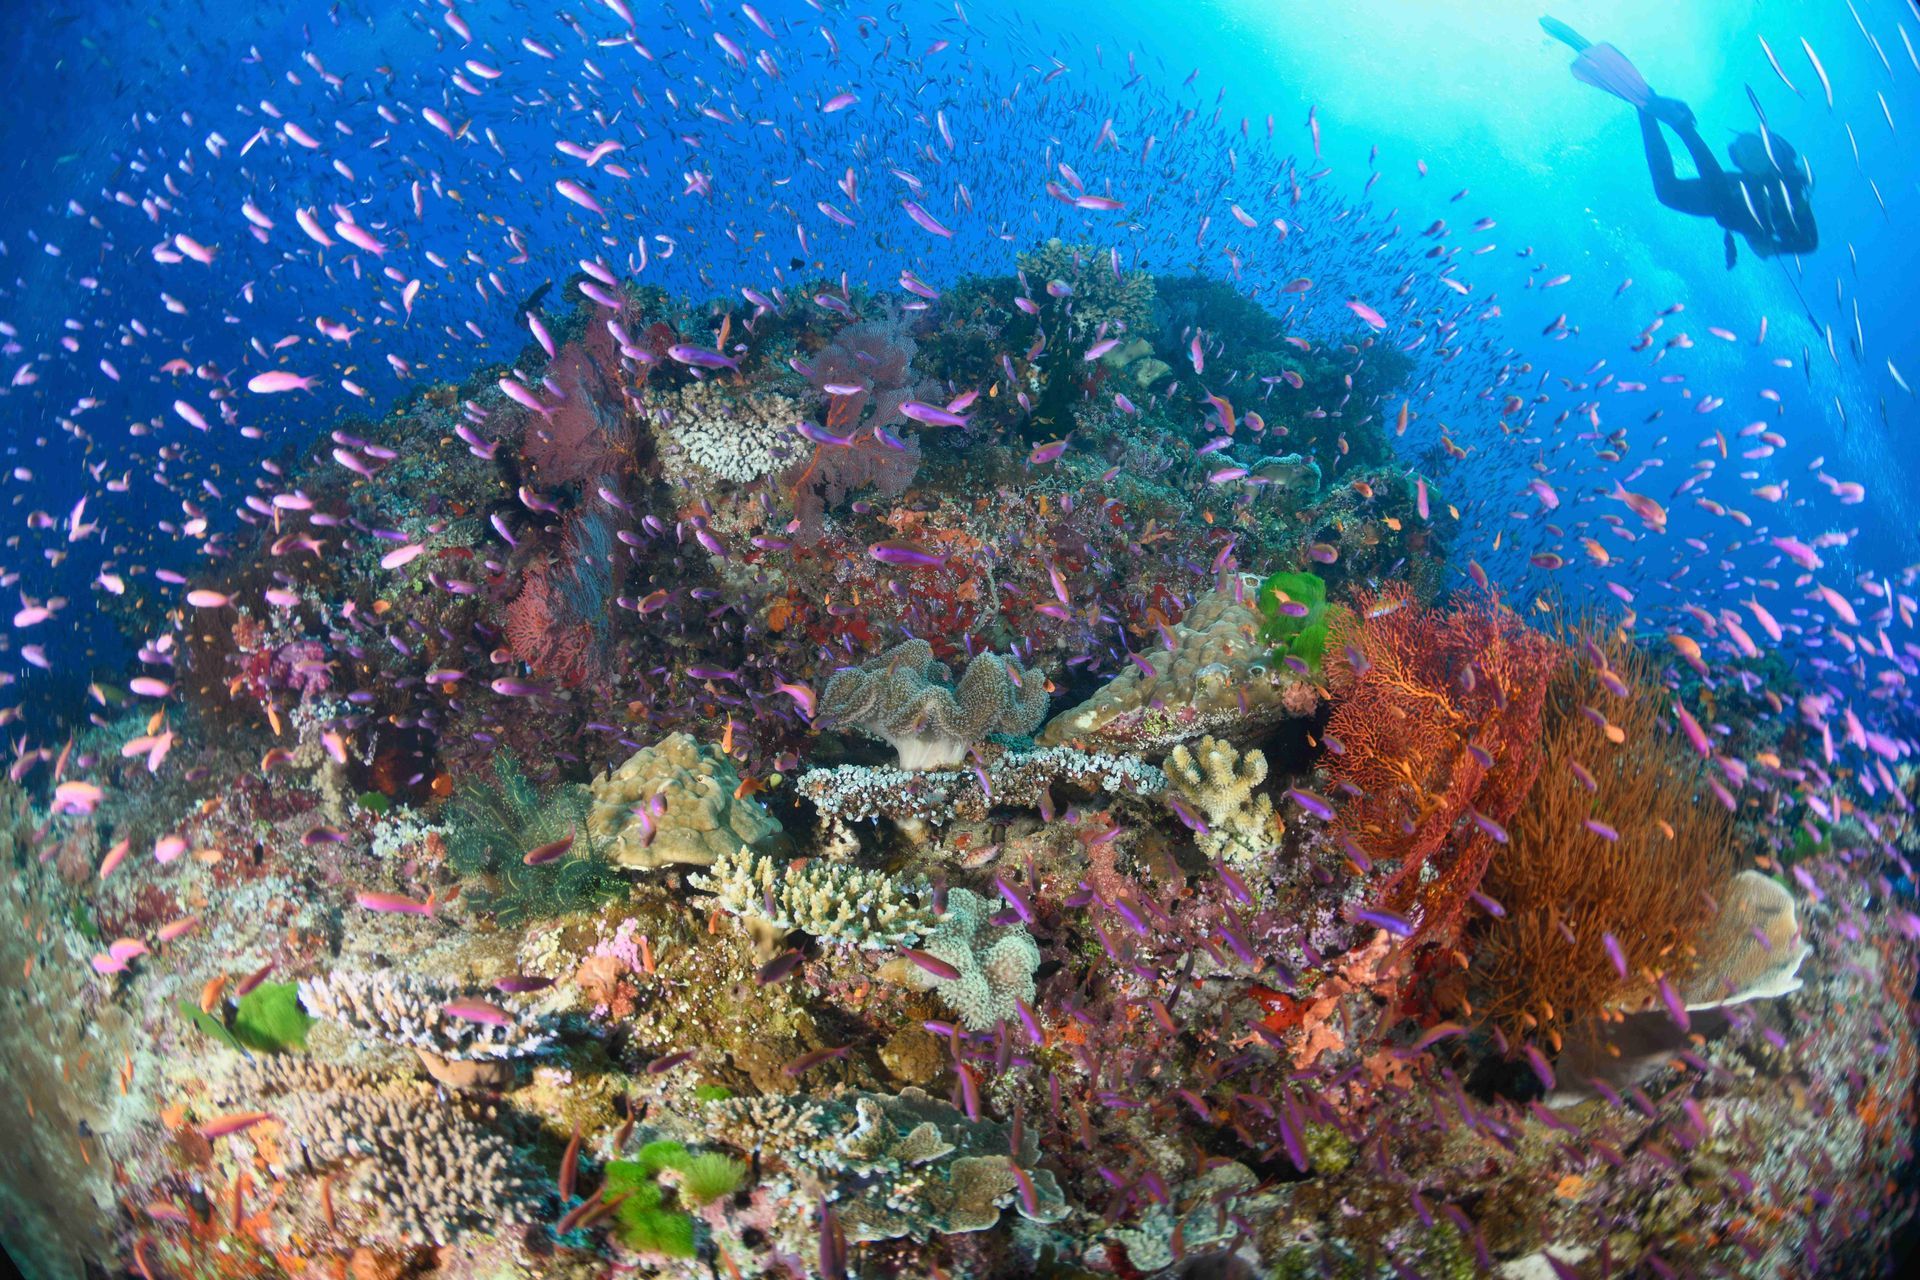 A diver in the blue swimming over a coral reef covered in small tropical fish on a dive site known as 'Black magic mountain' in Bligh Water, Fiji